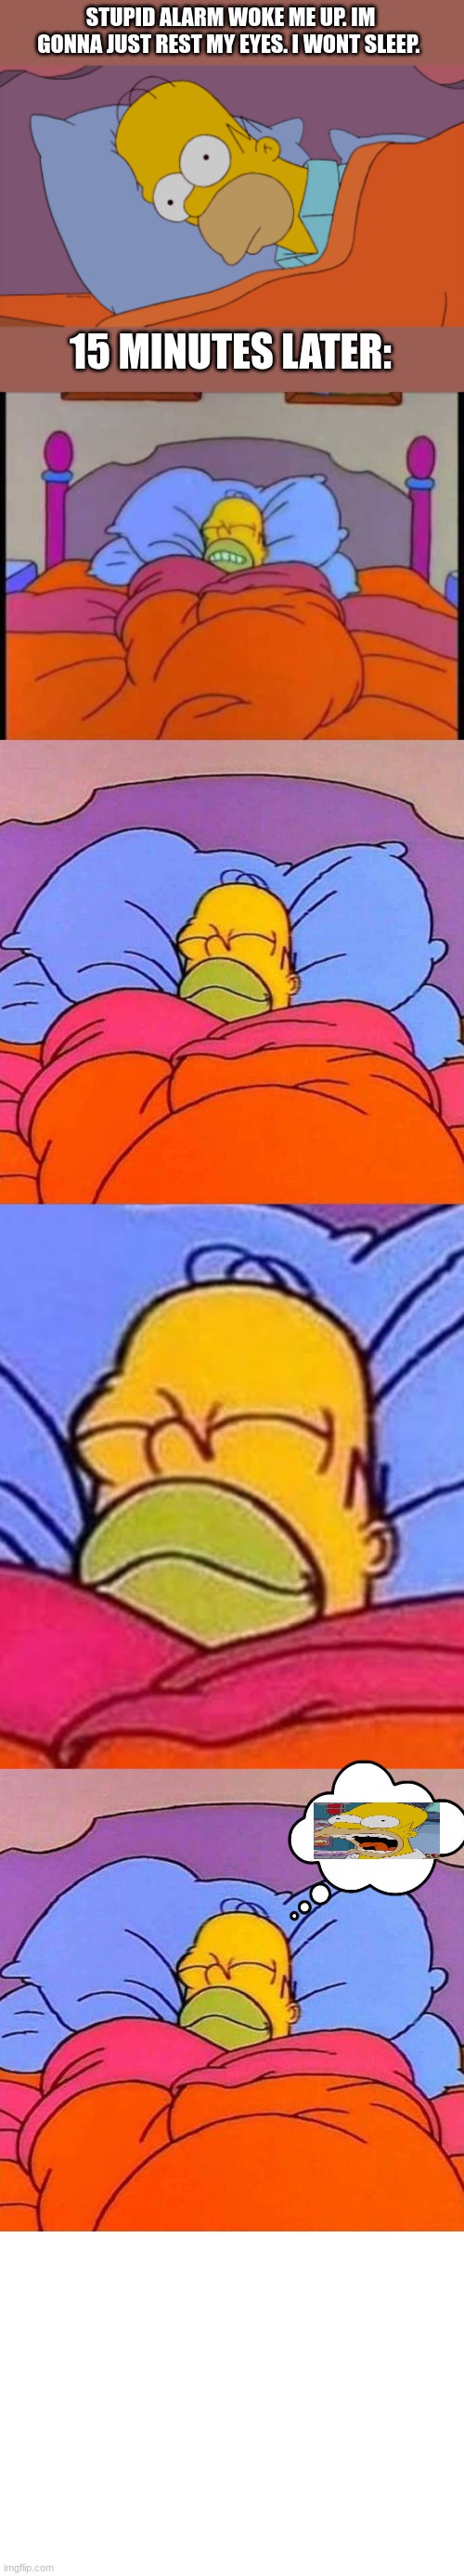 im just gonna  ̈go to sleep ̈ | STUPID ALARM WOKE ME UP. IM GONNA JUST REST MY EYES. I WONT SLEEP. 15 MINUTES LATER: | image tagged in homer can't sleep,homer sleep,homer napping,homer freaking out | made w/ Imgflip meme maker